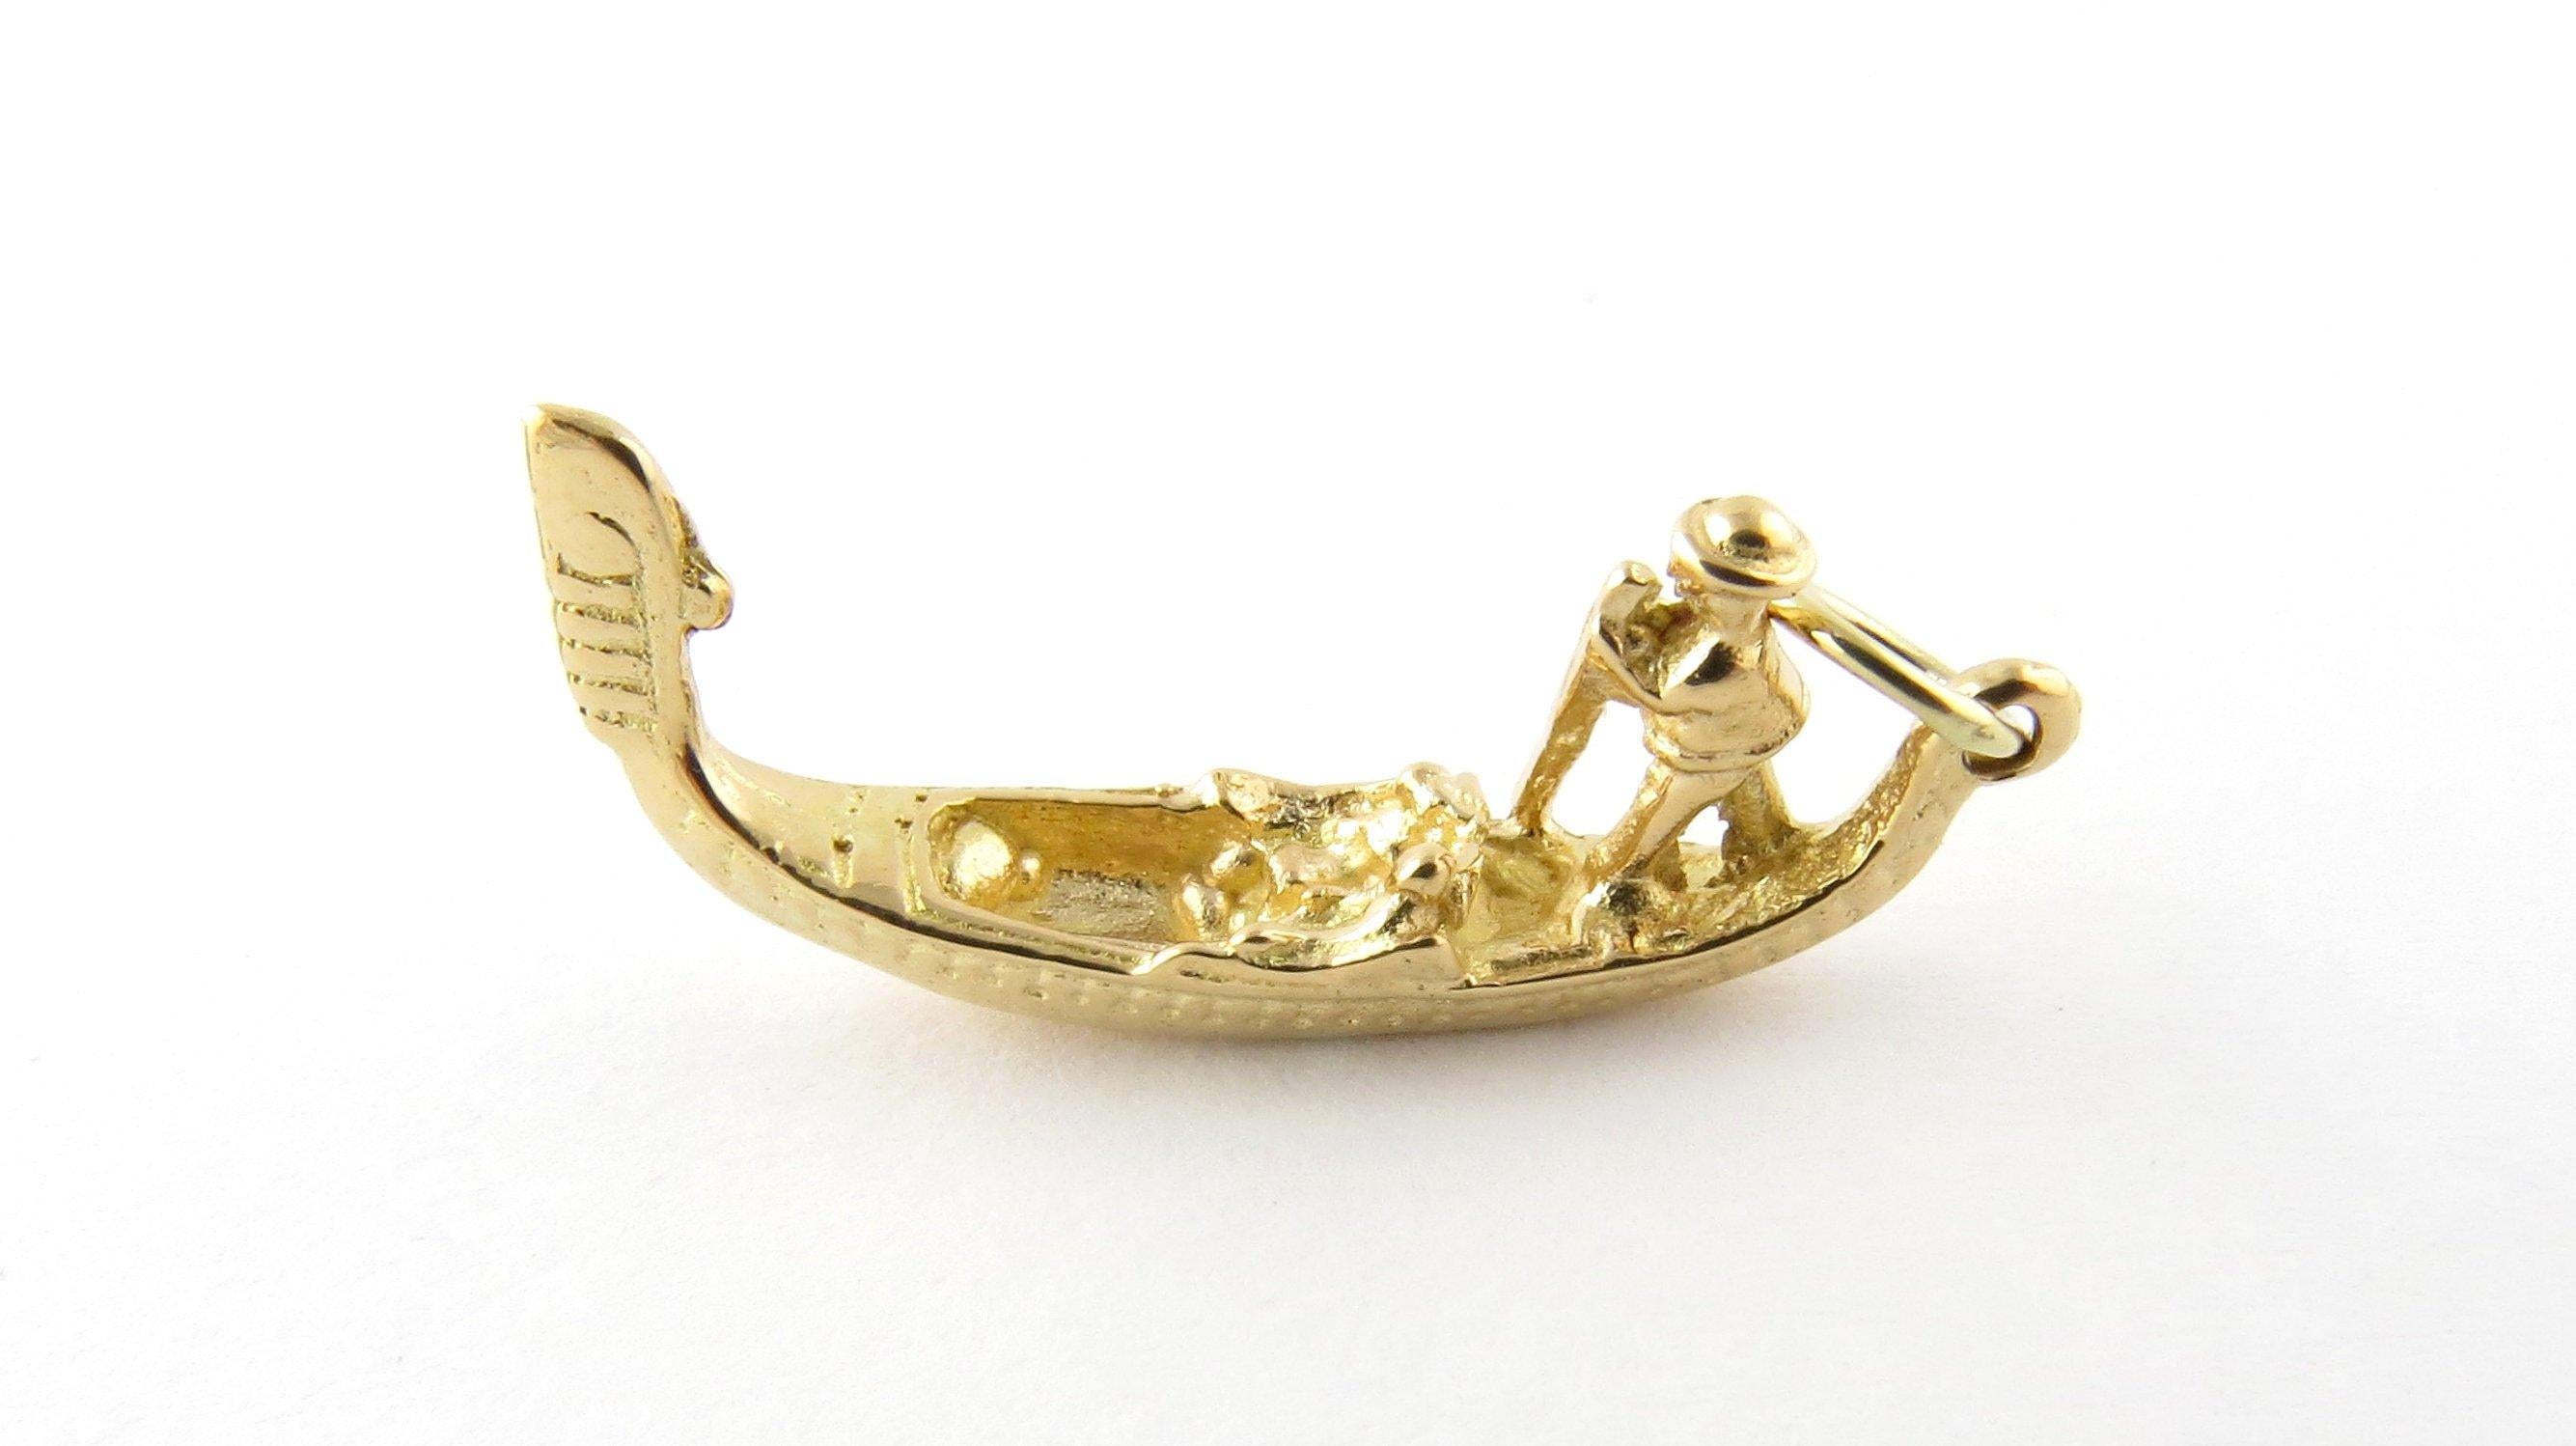 Vintage 18 Karat Yellow Gold Gondola Charm
Bring back those magical Venice nights! 
This lovely 3D charm features a miniature gondola and gondolier beautifully detailed in 18K yellow gold. 
Size: 29 mm x 12 mm (actual charm) 
Weight: 2.7 dwt. / 4.3